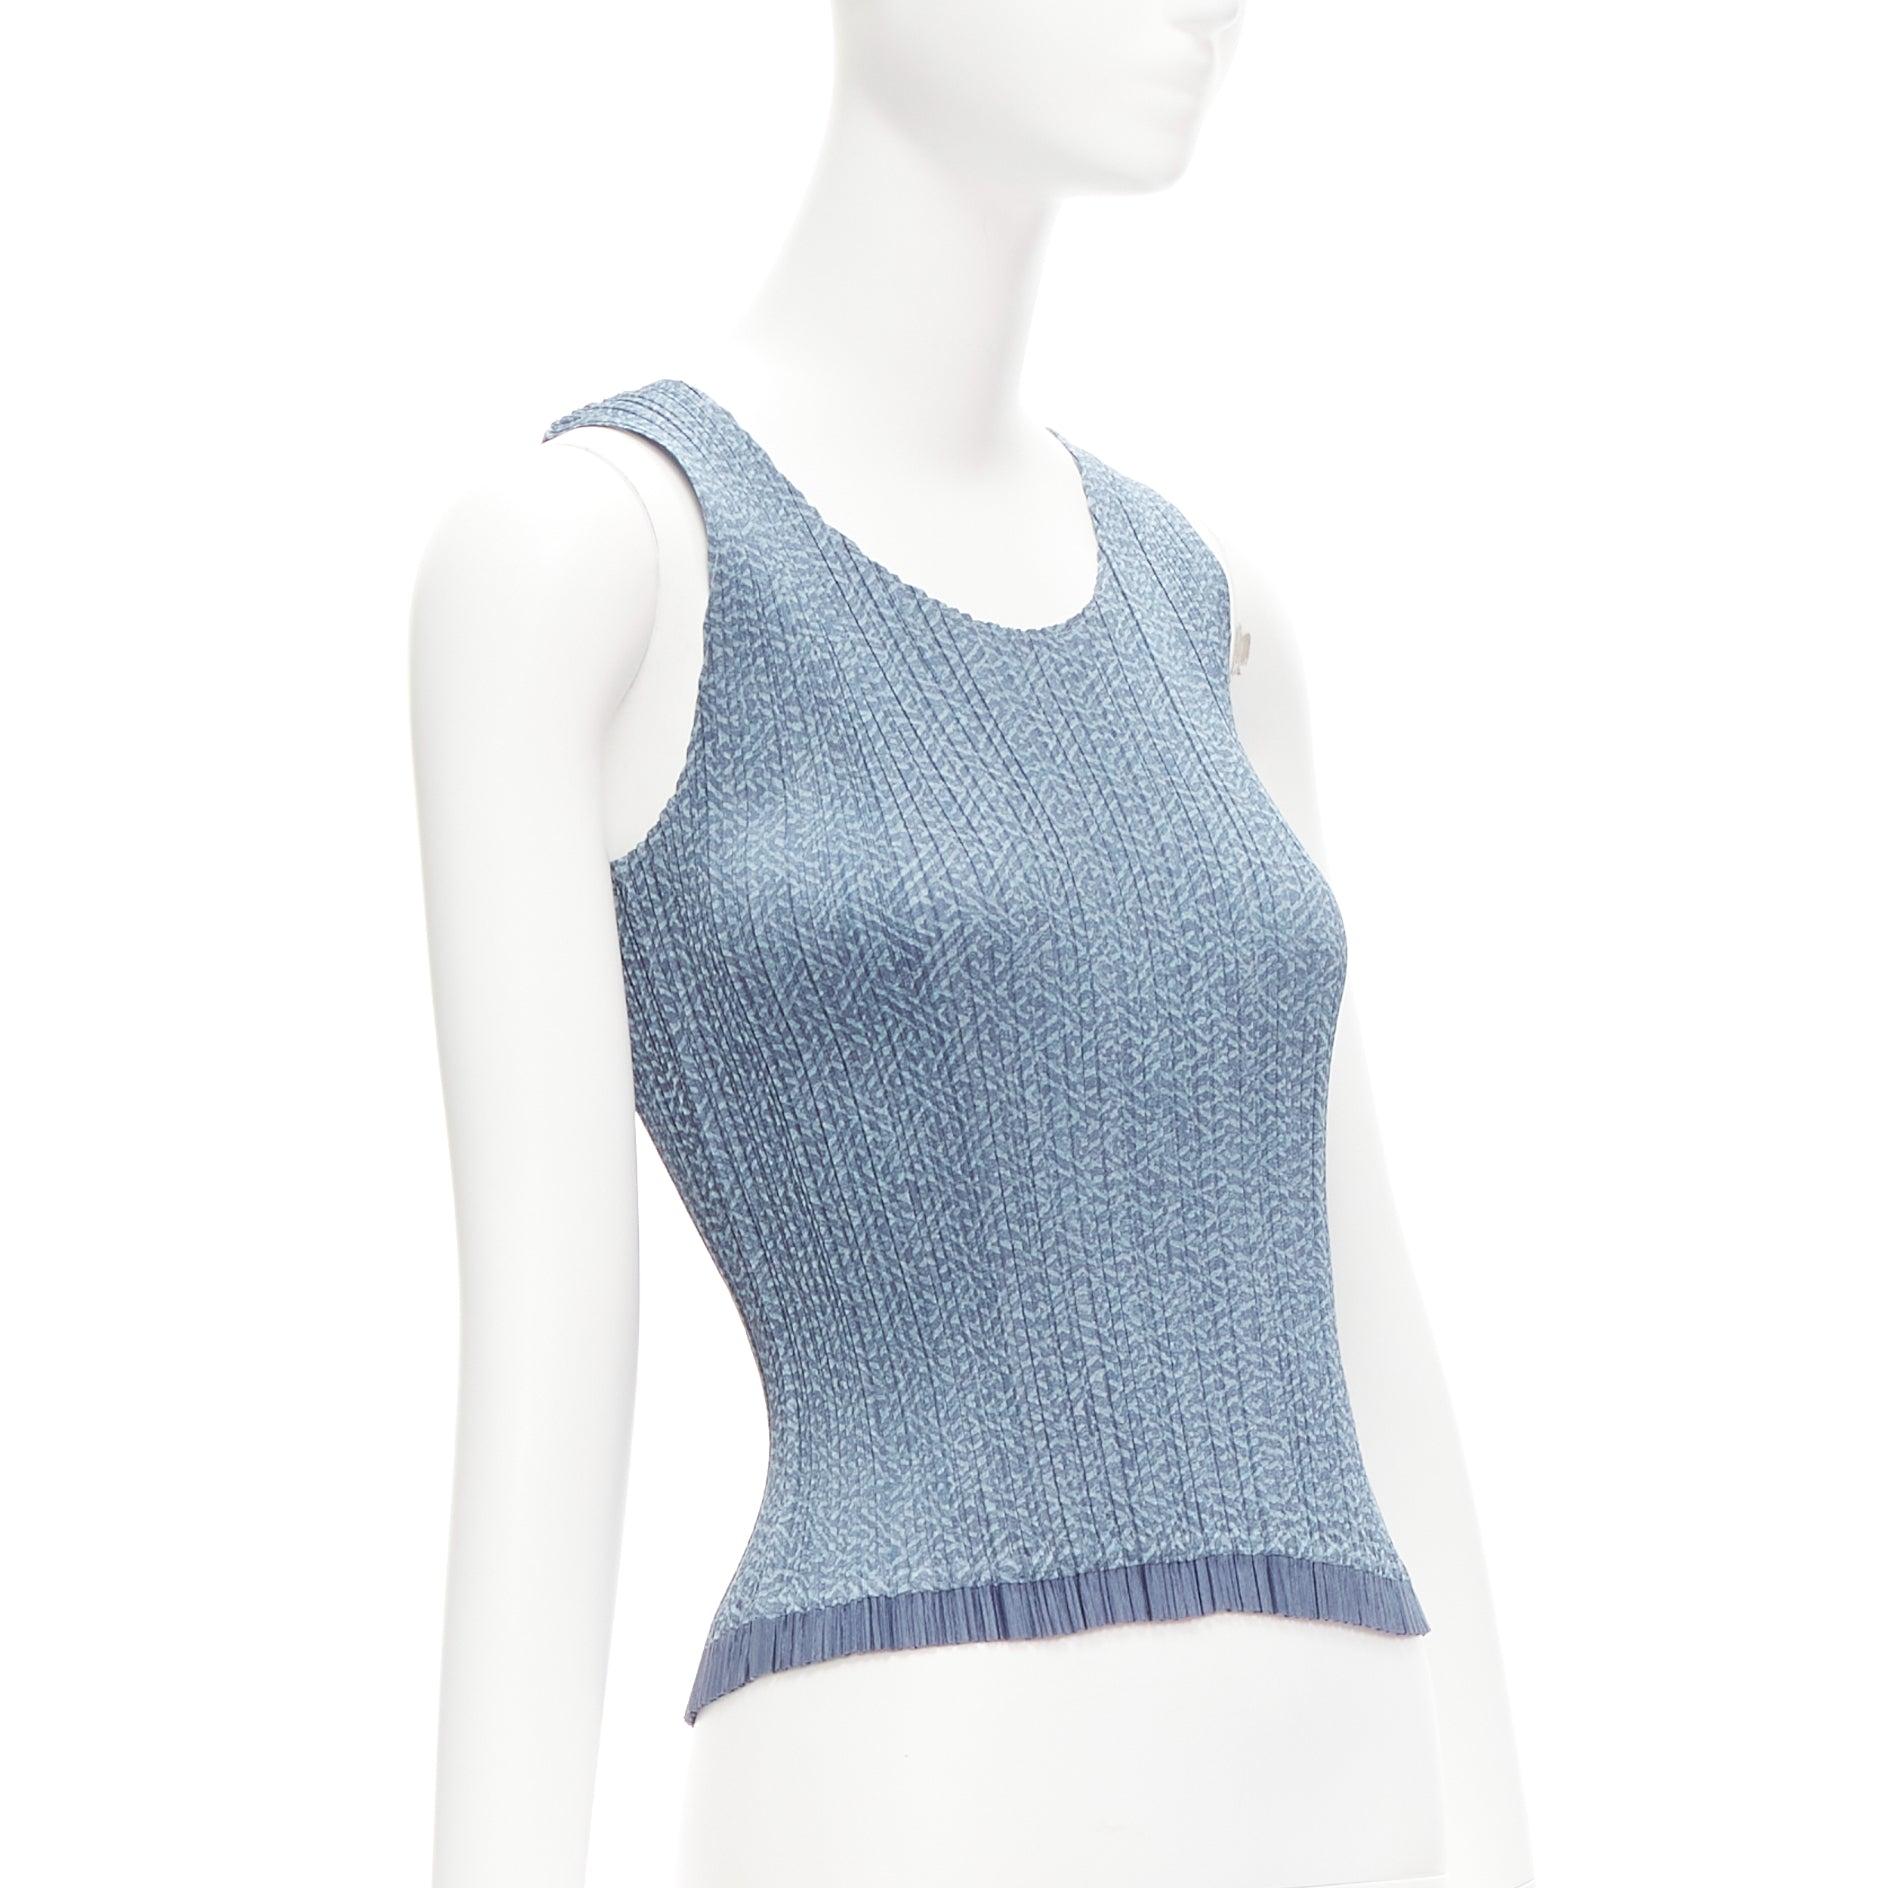 ISSEY MIYAKE PLEATS PLEASE blue maze print plisse scoop vest tank JP3 L
Reference: CNLE/A00257
Brand: Issey Miyake
Material: Polyester
Color: Blue
Pattern: Abstract
Closure: Slip On
Extra Details: Contrast hem.
Made in: Japan

CONDITION:
Condition: